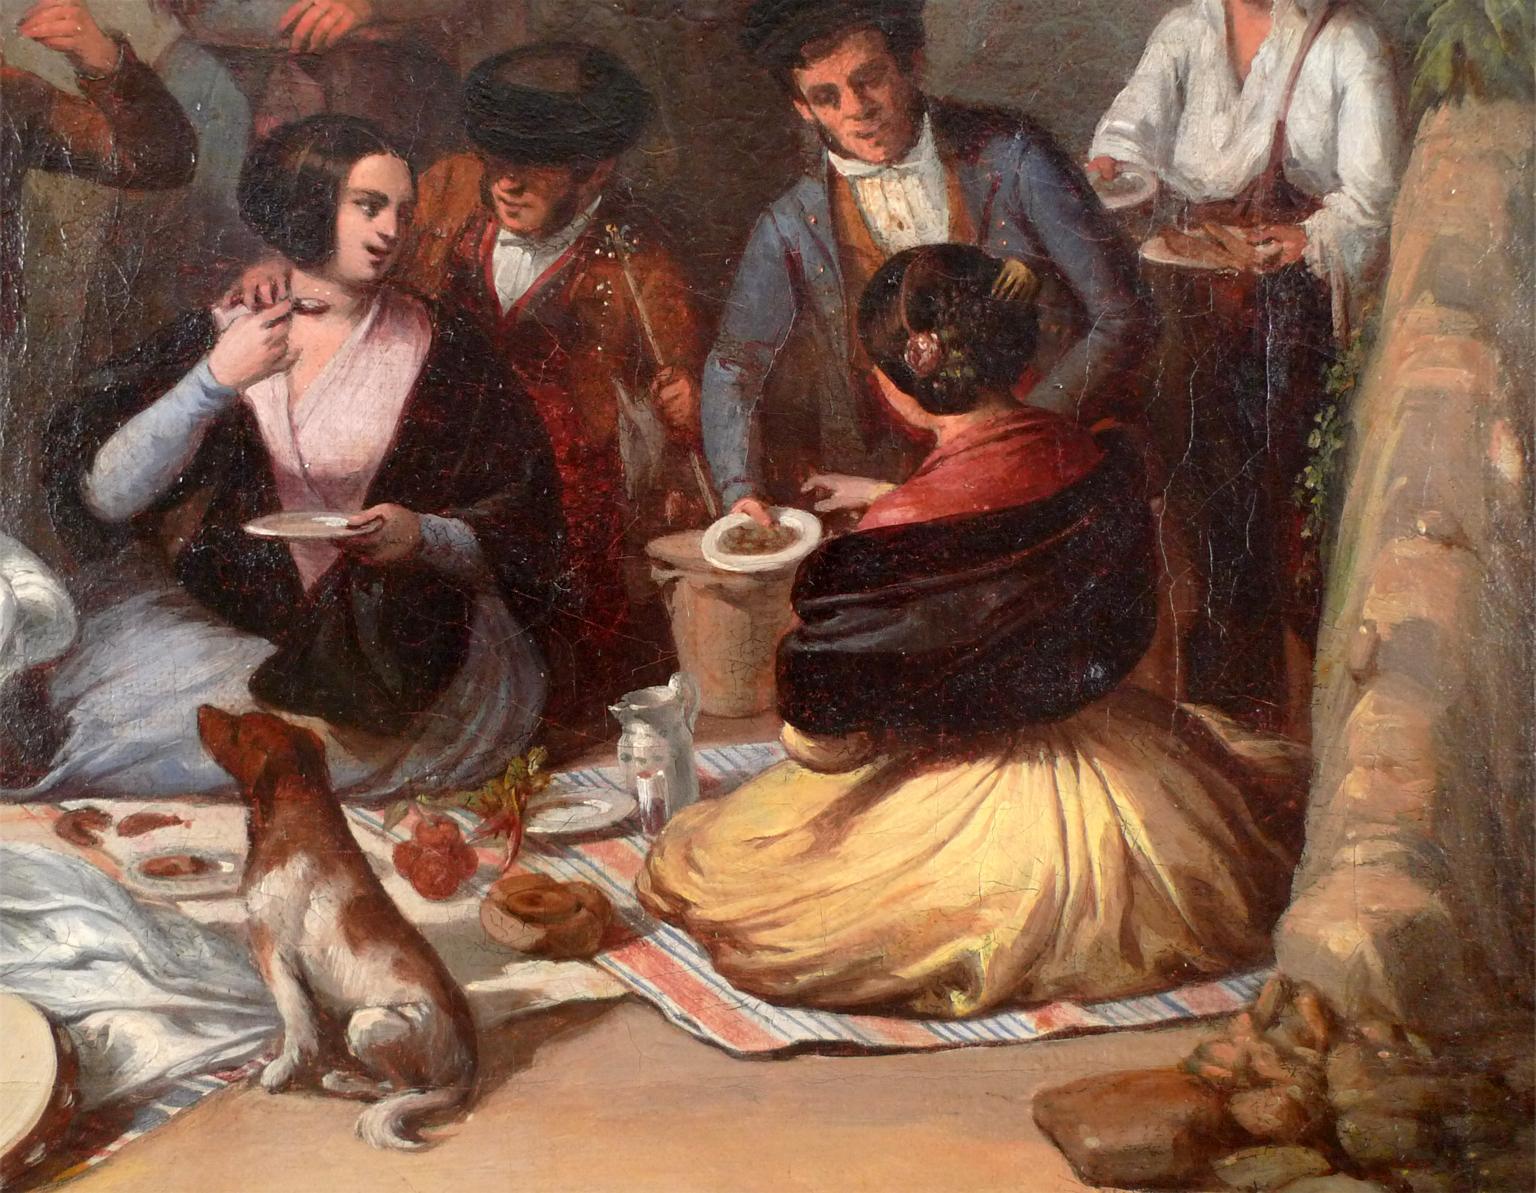 JOAQUÍN DOMÍNGUEZ BÉCQUER
Spanish, 1817 - 1879
THE PICNIC
signed, located & dated 